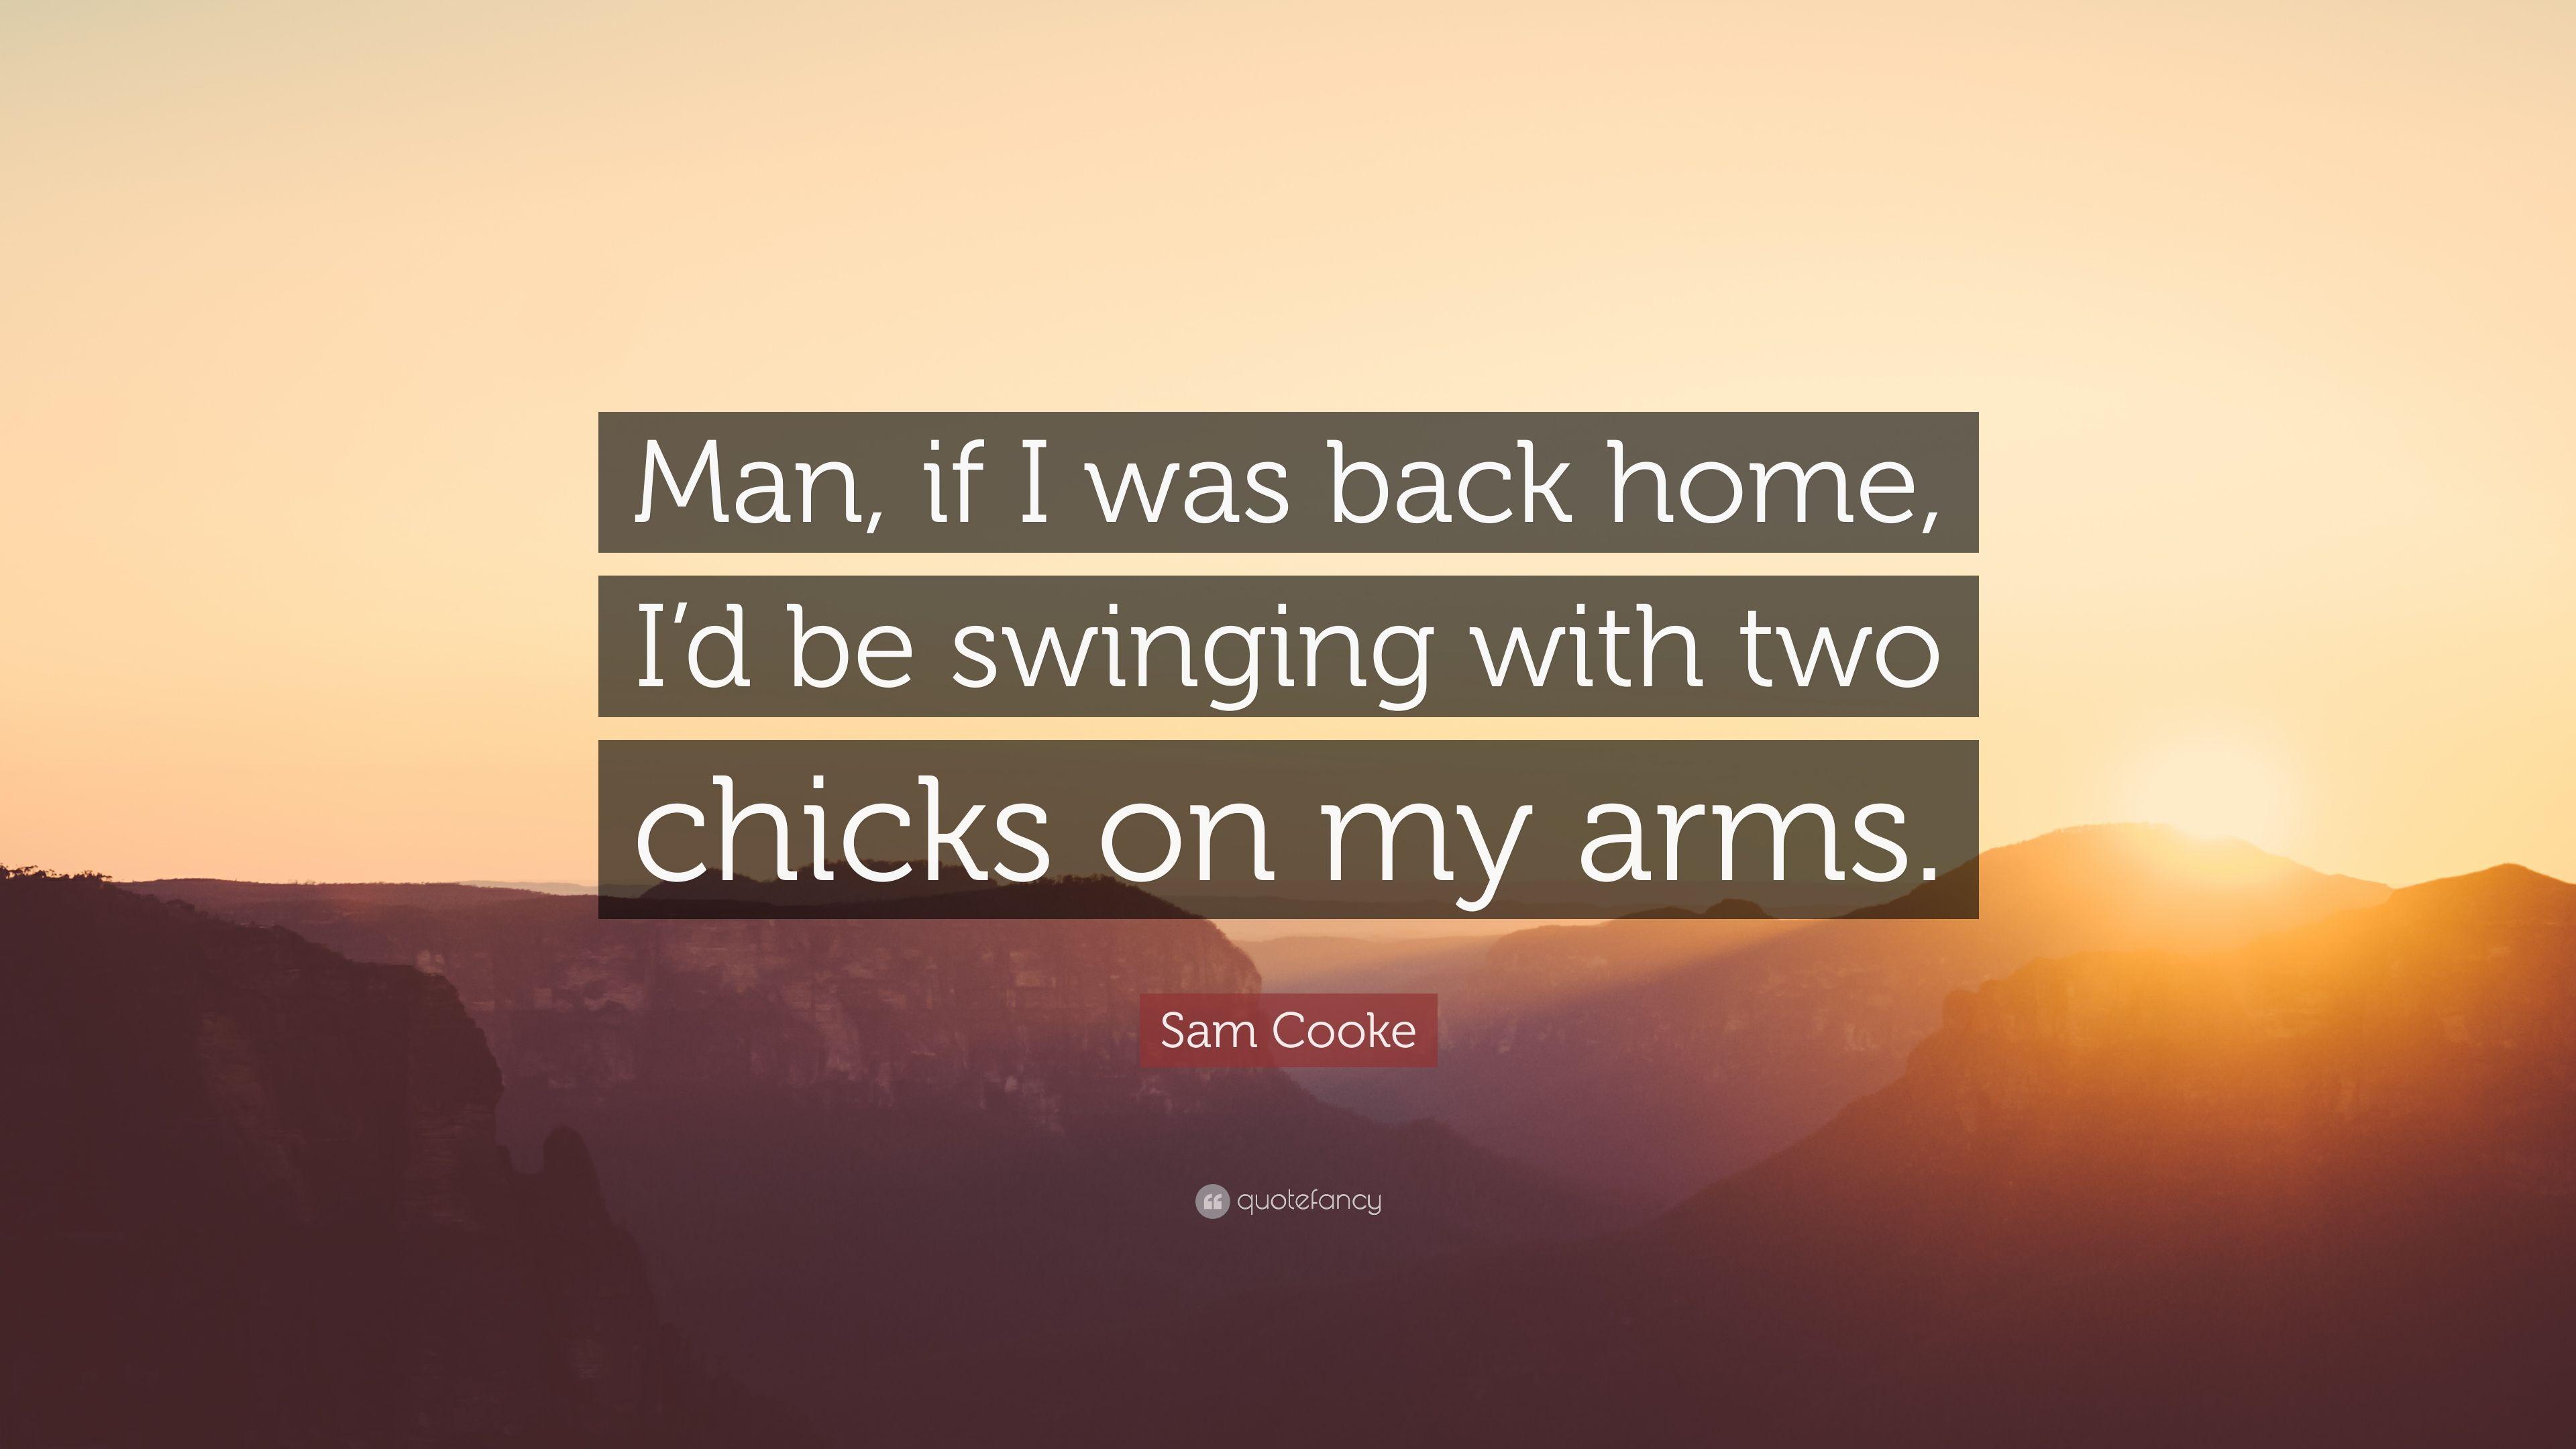 Sam Cooke Quote: “Man, if I was back home, I'd be swinging